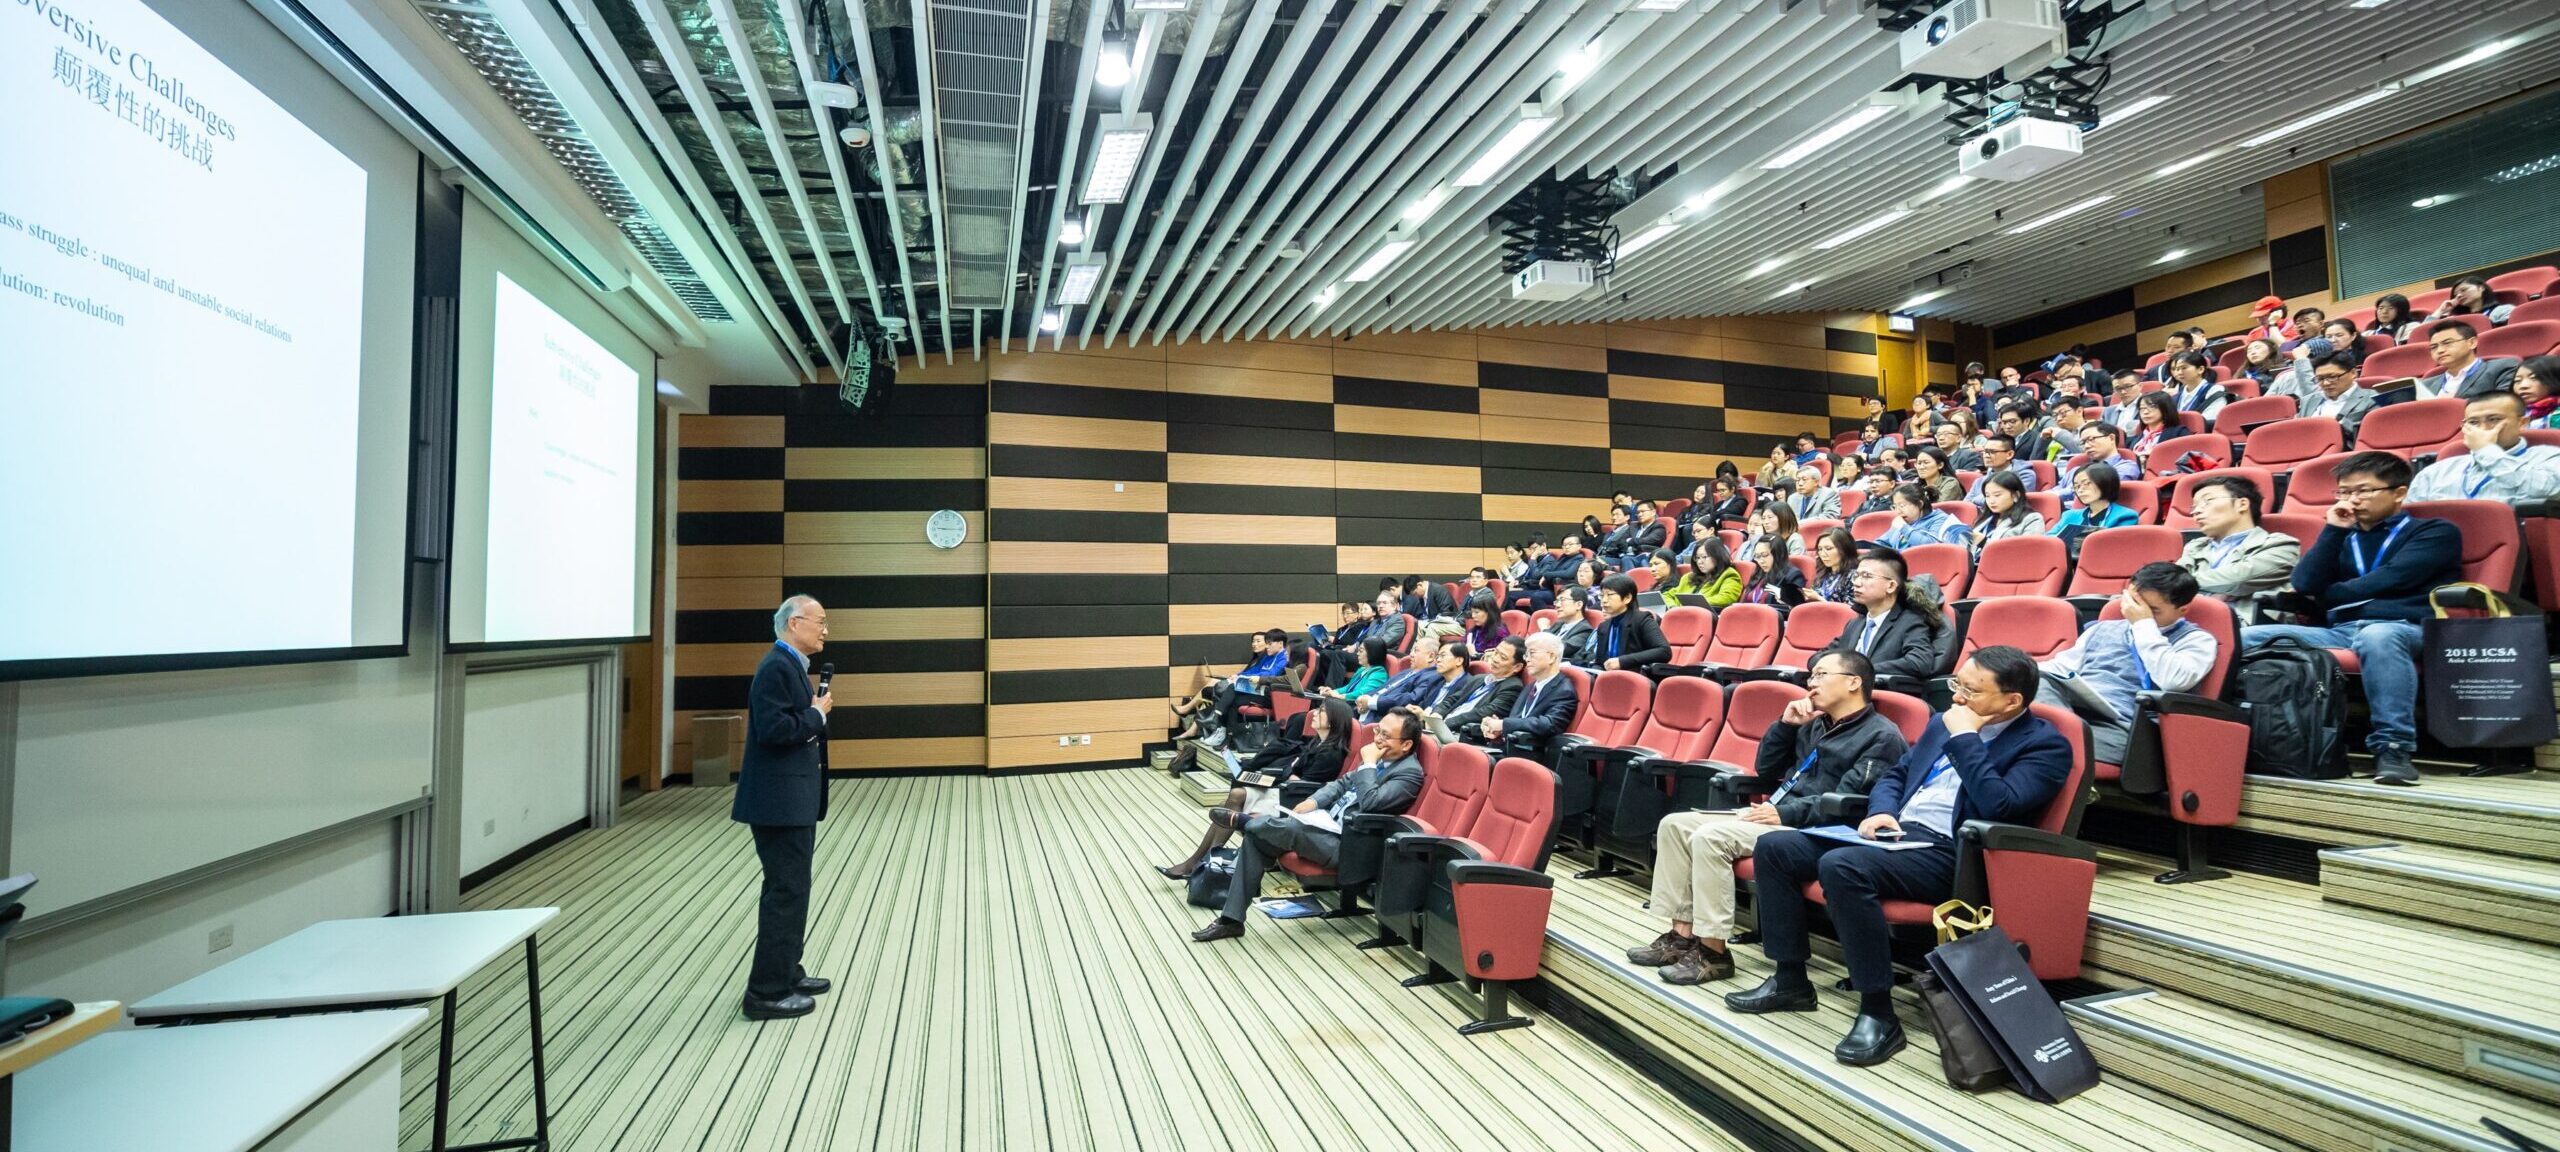 Man speaking in front of a slideshow to an audience sitting in a lecture hall